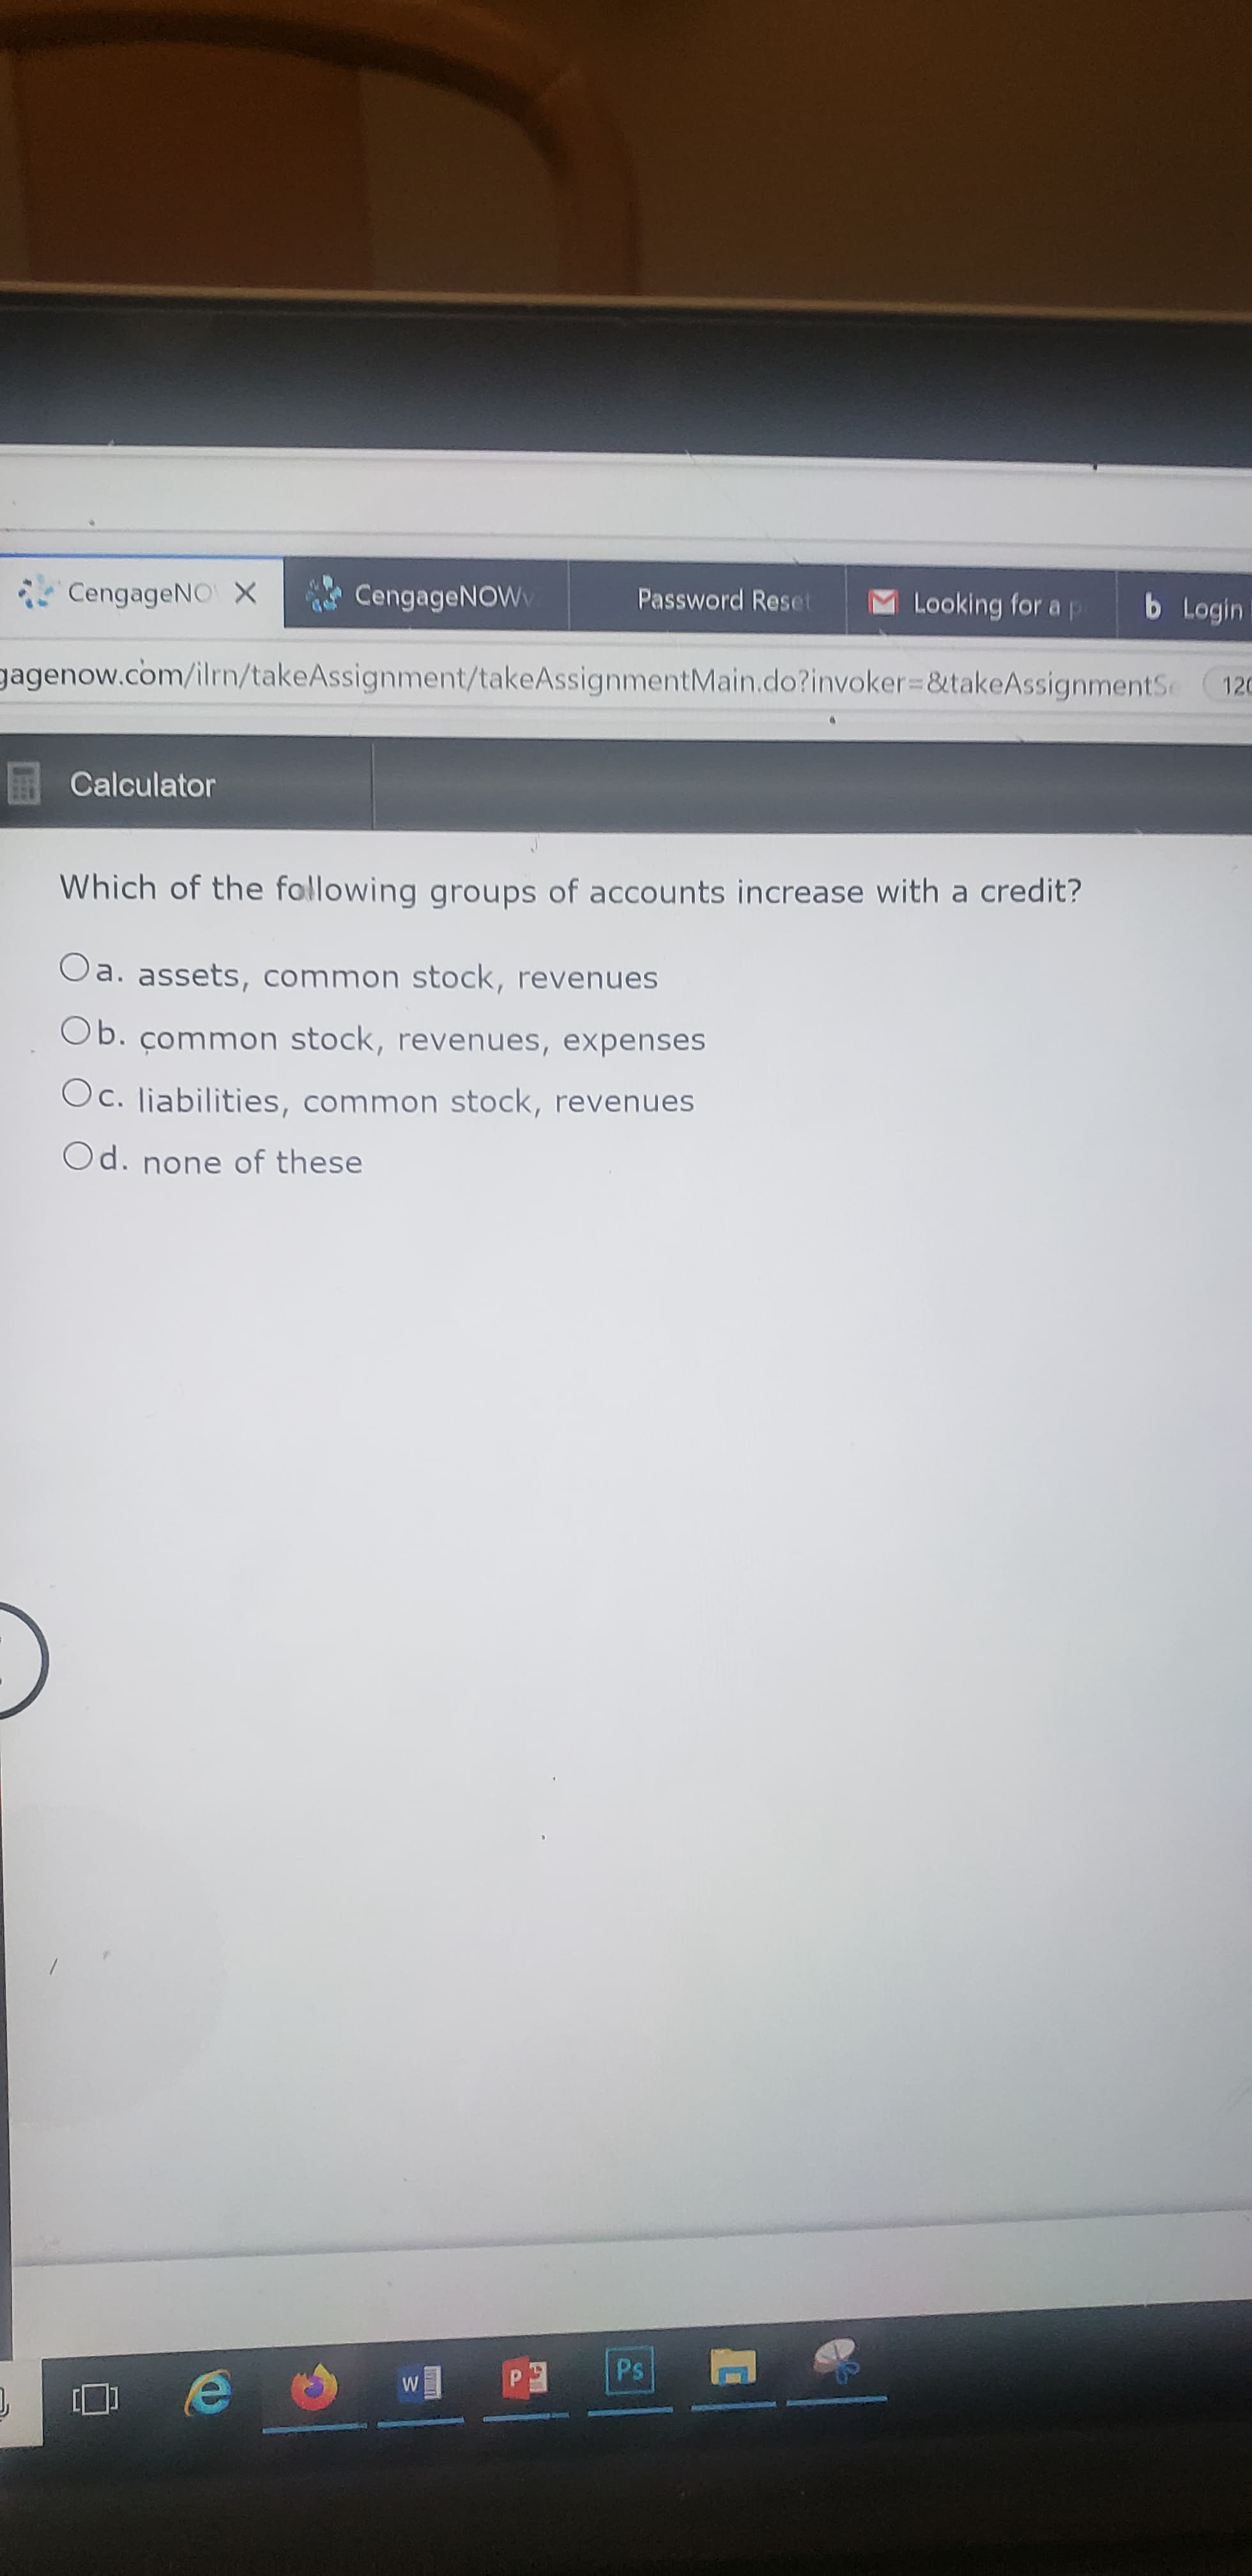 Which of the following groups of accounts increase with a credit?
Oa. assets, common stock, revenues
Ob. common stock, revenues, expenses
Oc. liabilities, common stock, revenues
